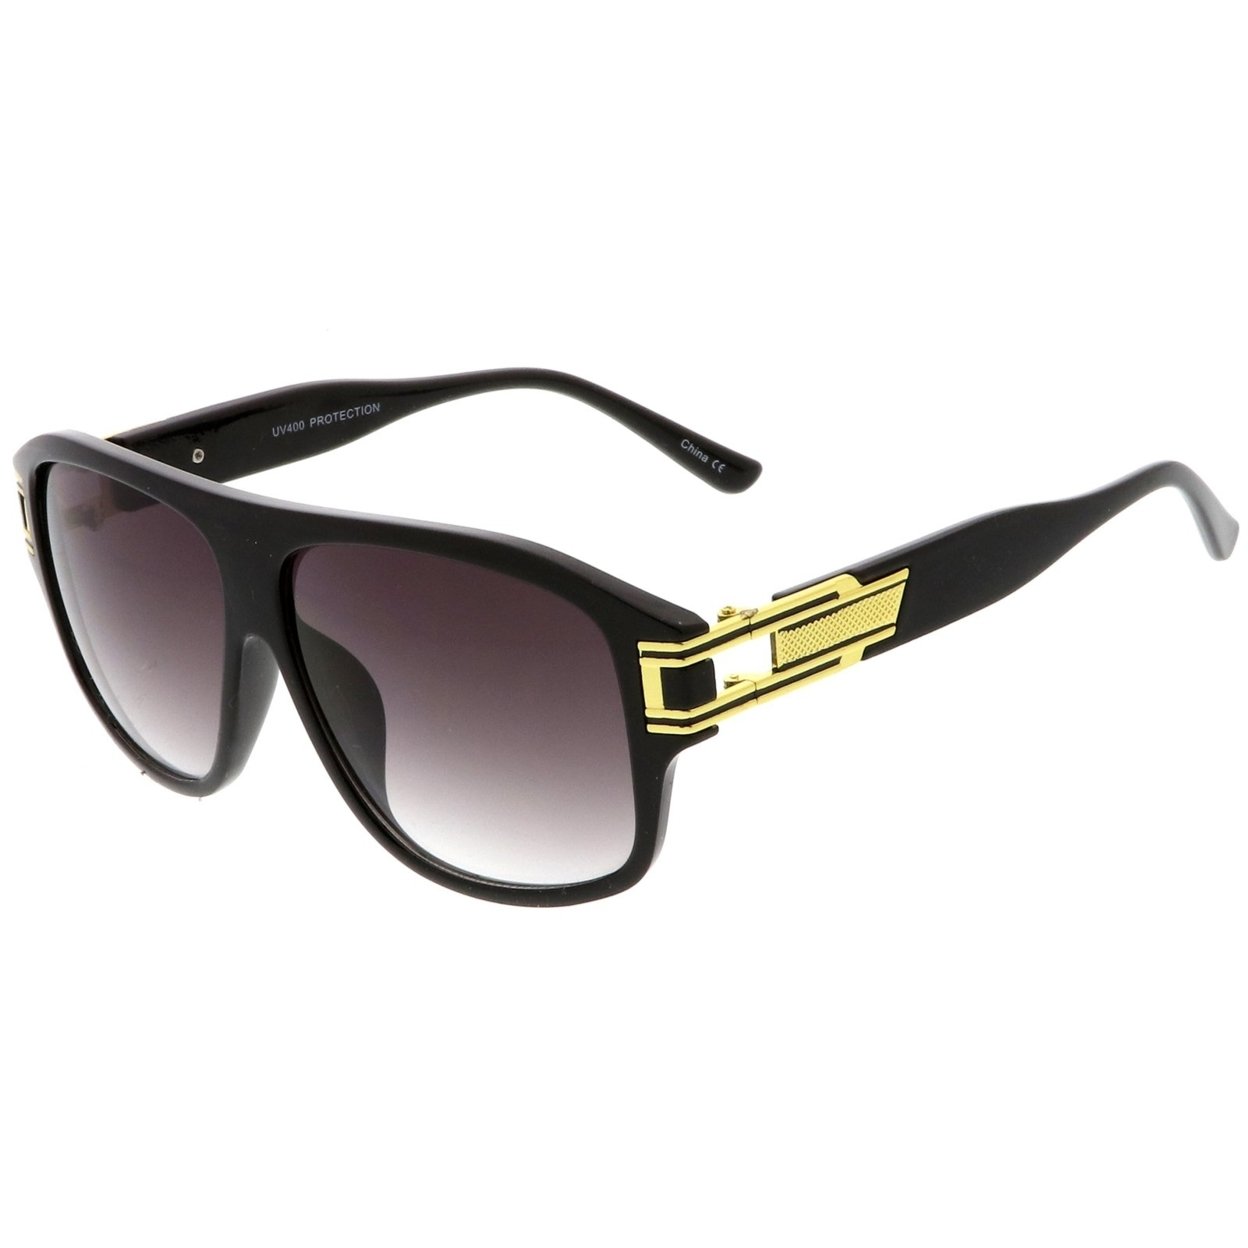 Oversize Flat Top Metal Accent Wide Temple Square Lens Aviator Sunglasses 60mm - Shiny Black-Gold / Lavender